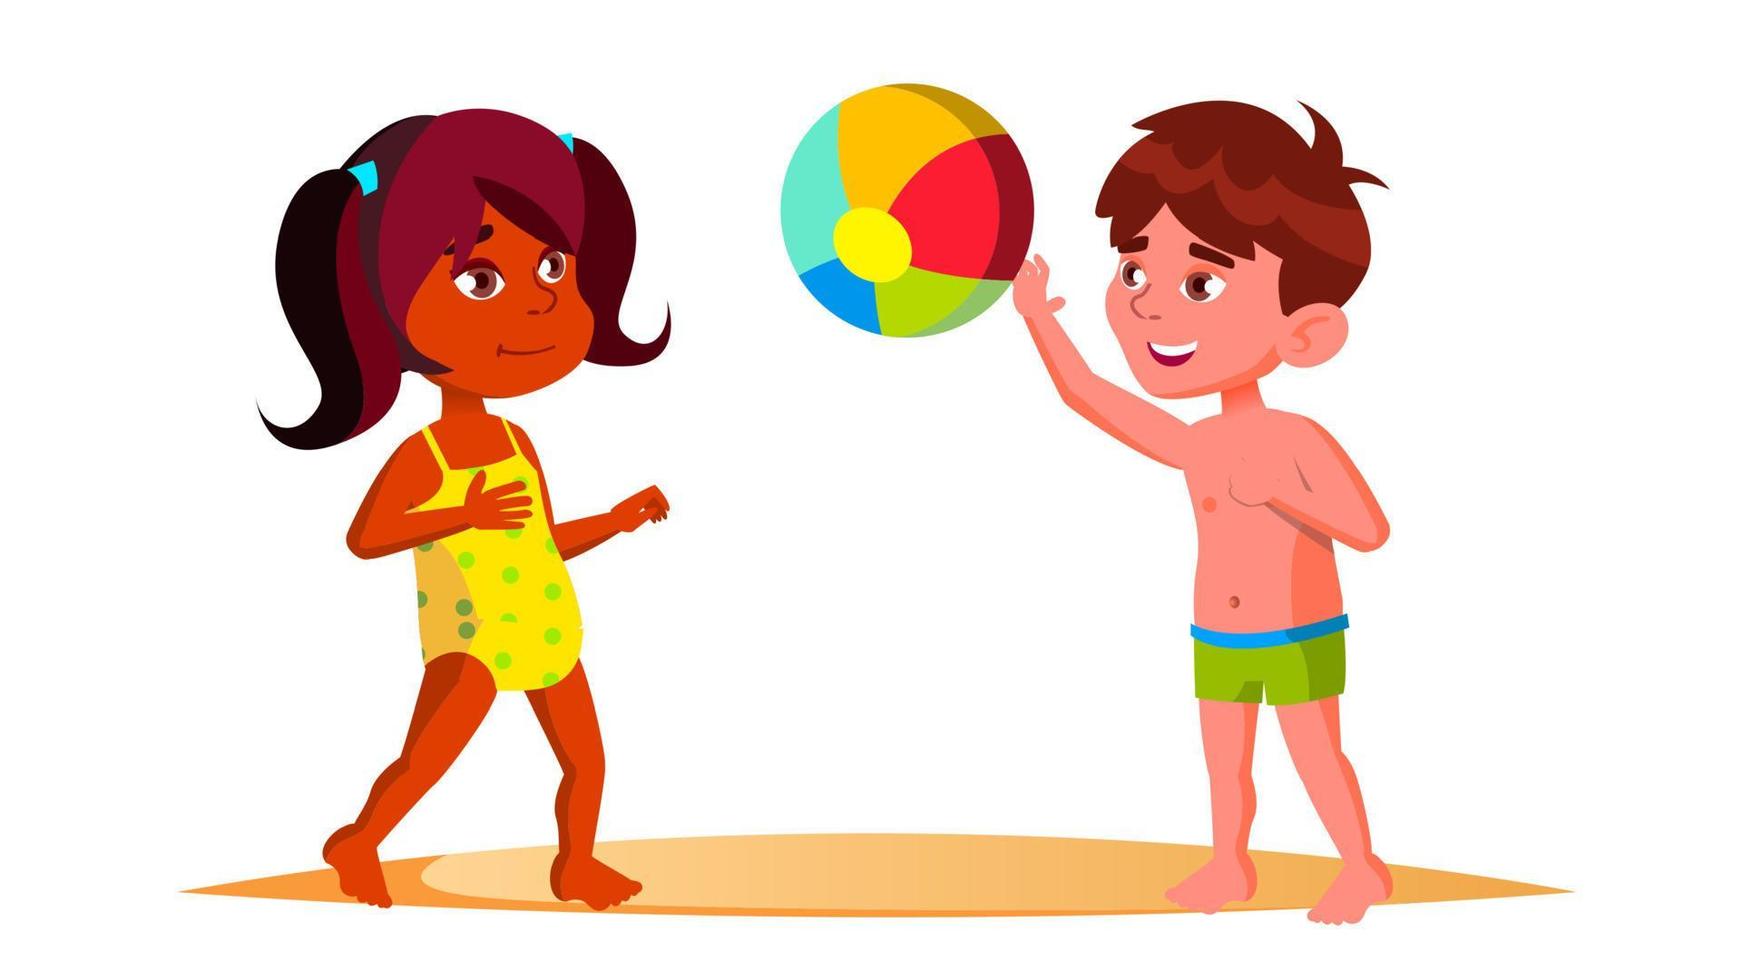 Indian Child Girl And European Boy In Beach Suits Playing Ball On The Beach Vector. Isolated Illustration vector